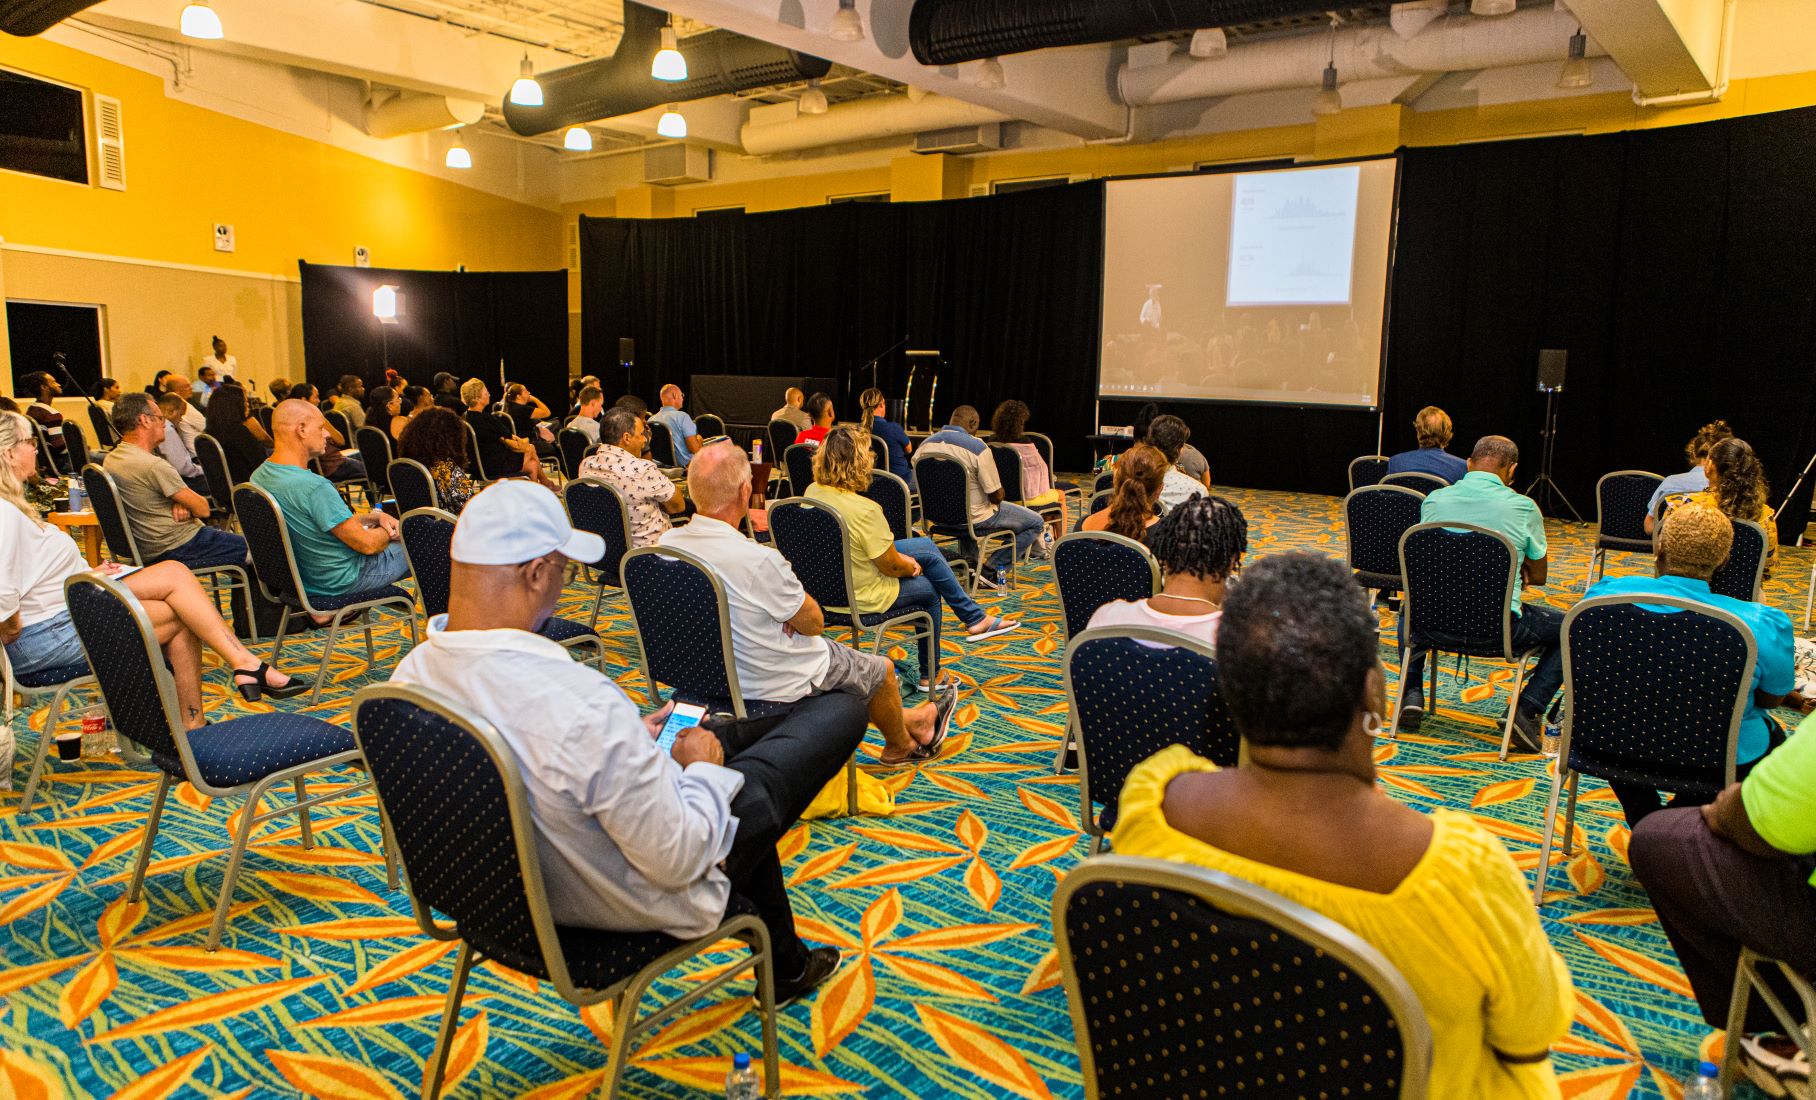 The Curaçao Tourist Board (CTB) Organizes Information Sessions for the Hospitality Industry